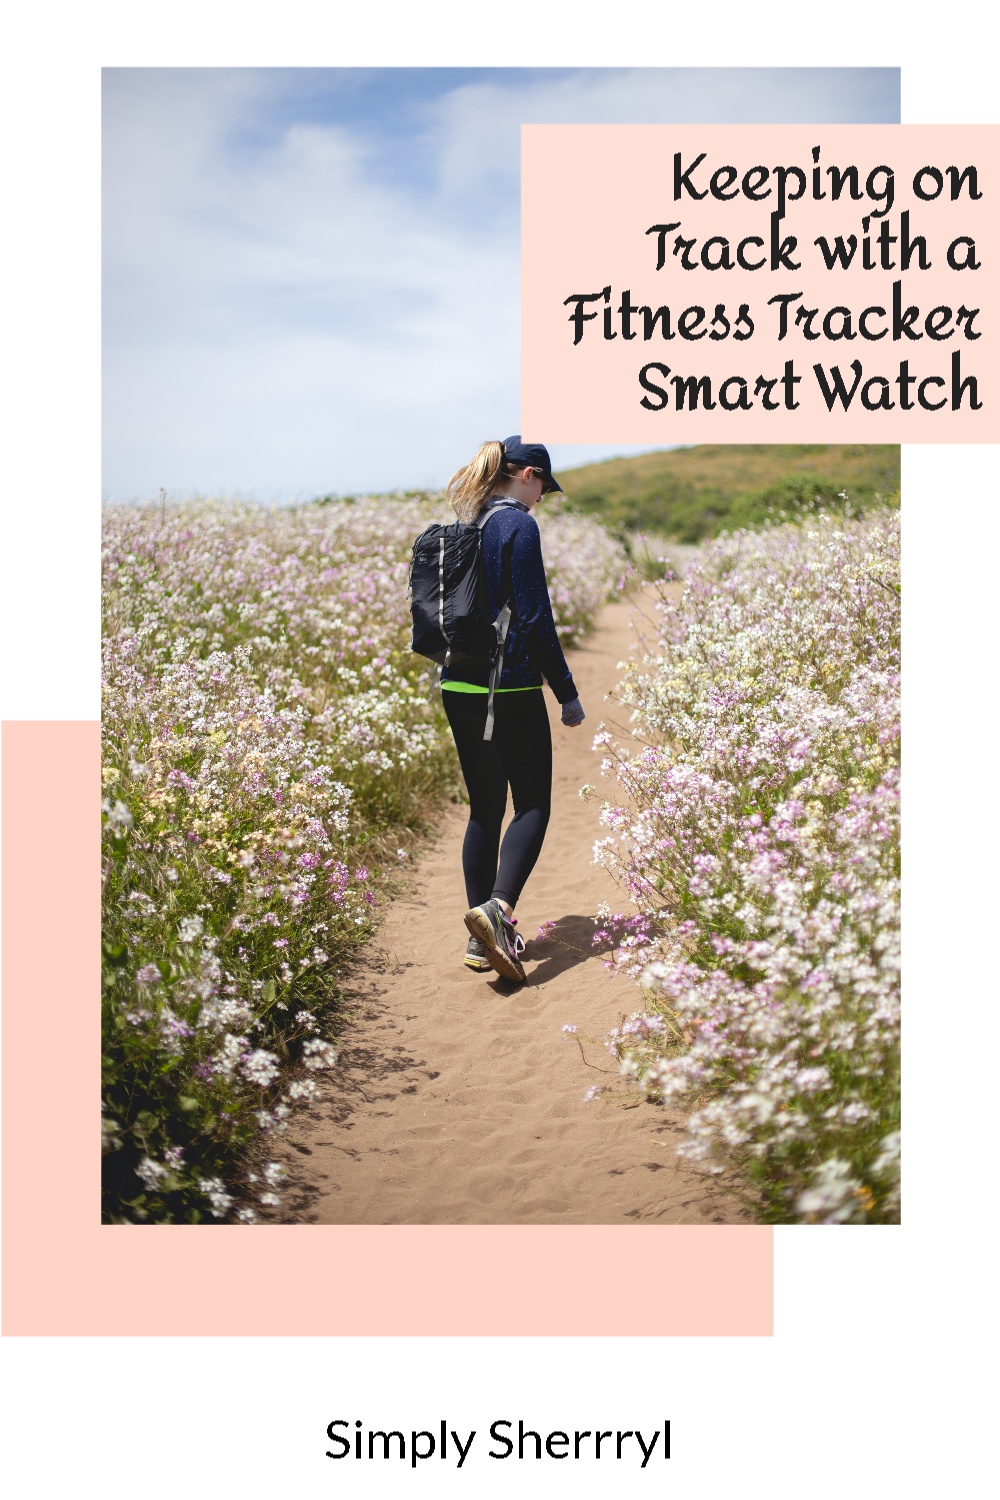 Keeping on Track with a Fitness Tracker Smart Watch